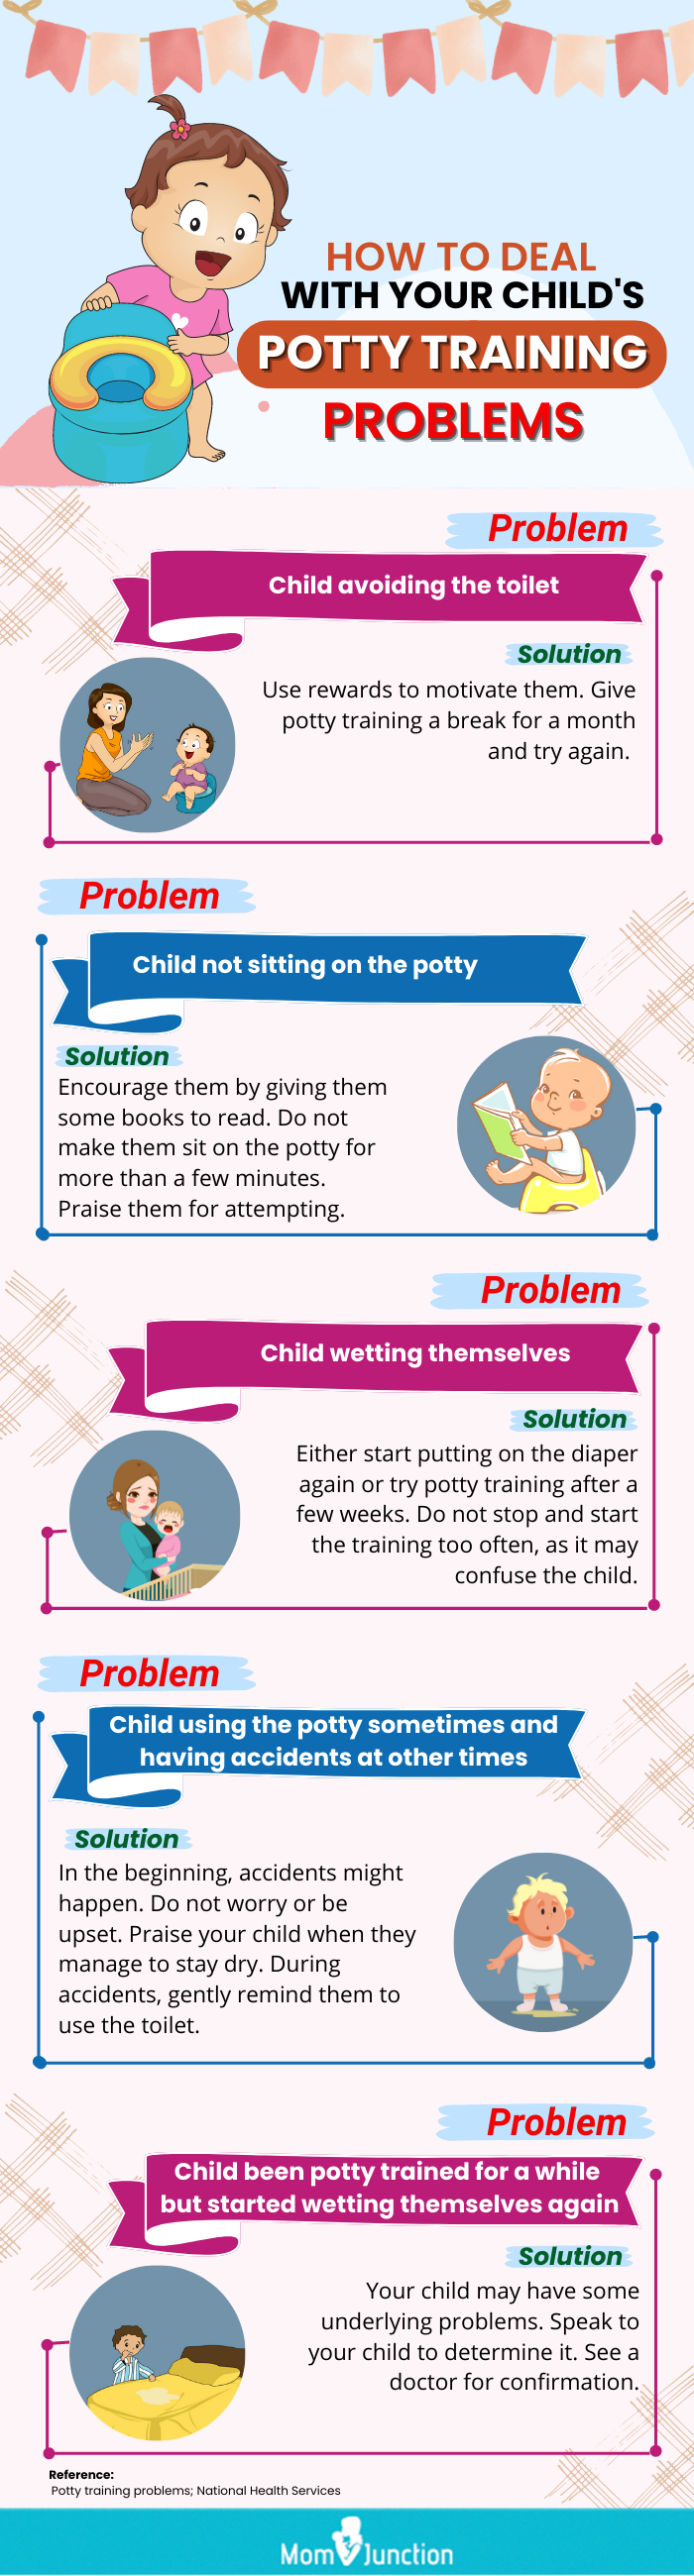 how to deal with your childs potty training problems (infographic)